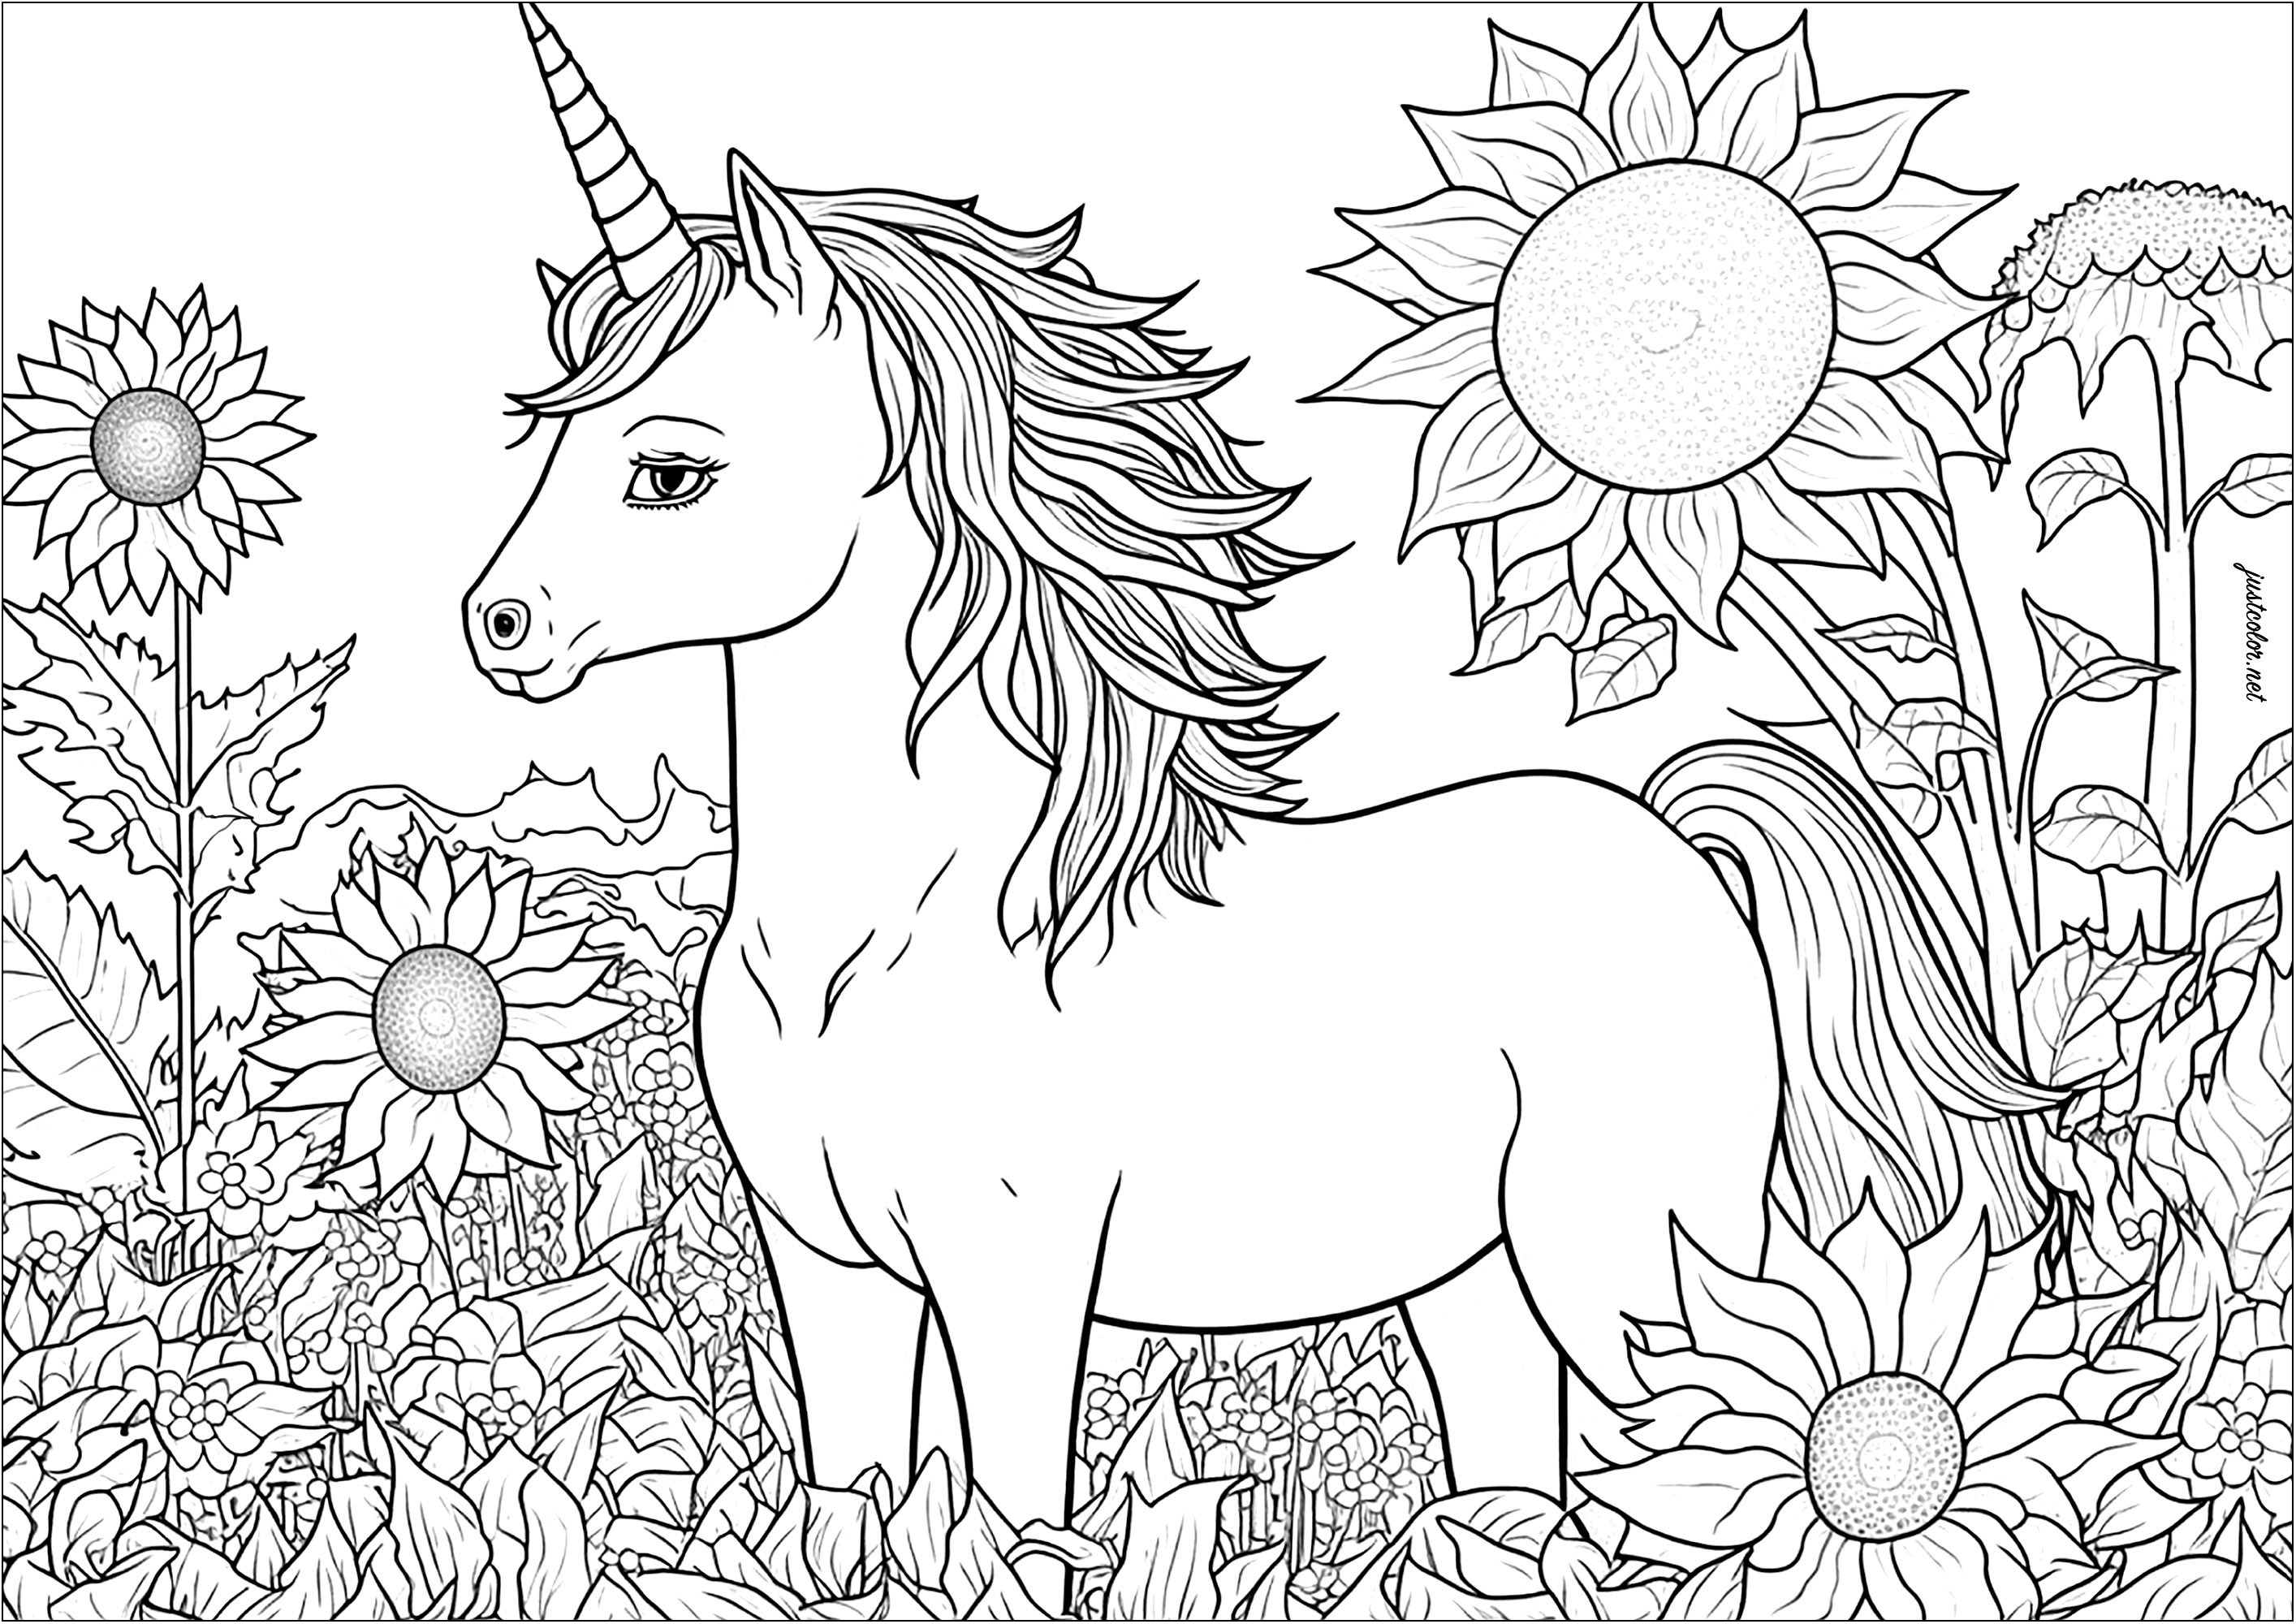 Unicorn and sunflowers coloring. Many details to color, whether in the flowers, vegetation or mane of this beautiful unicorn.A coloring that is an authentic invitation to contemplation and meditation.